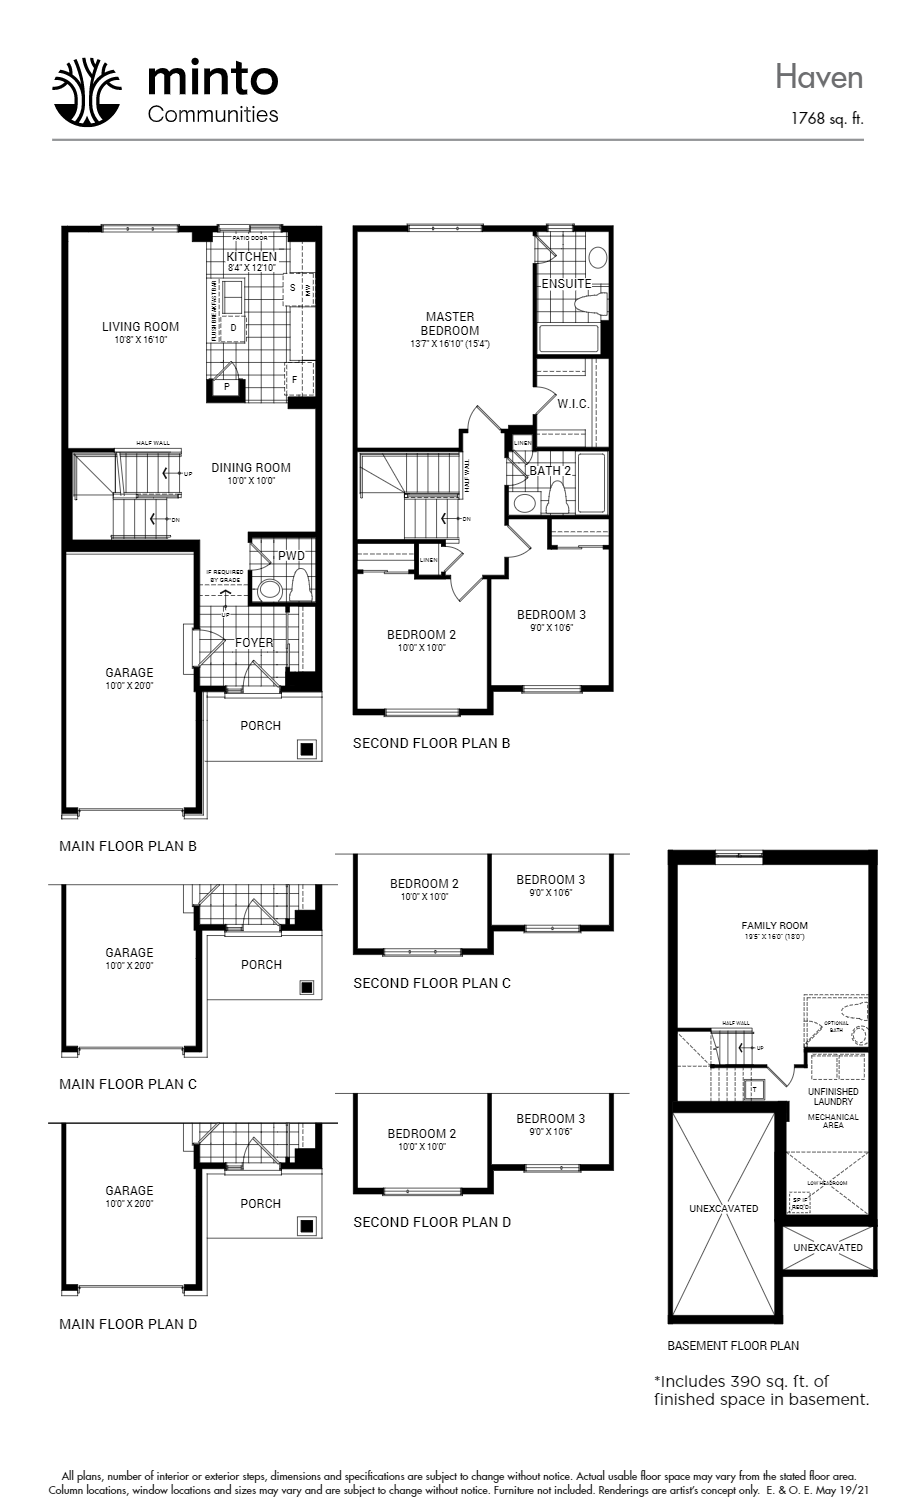 Haven Floor Plan of Avalon Vista by Minto Communities with undefined beds